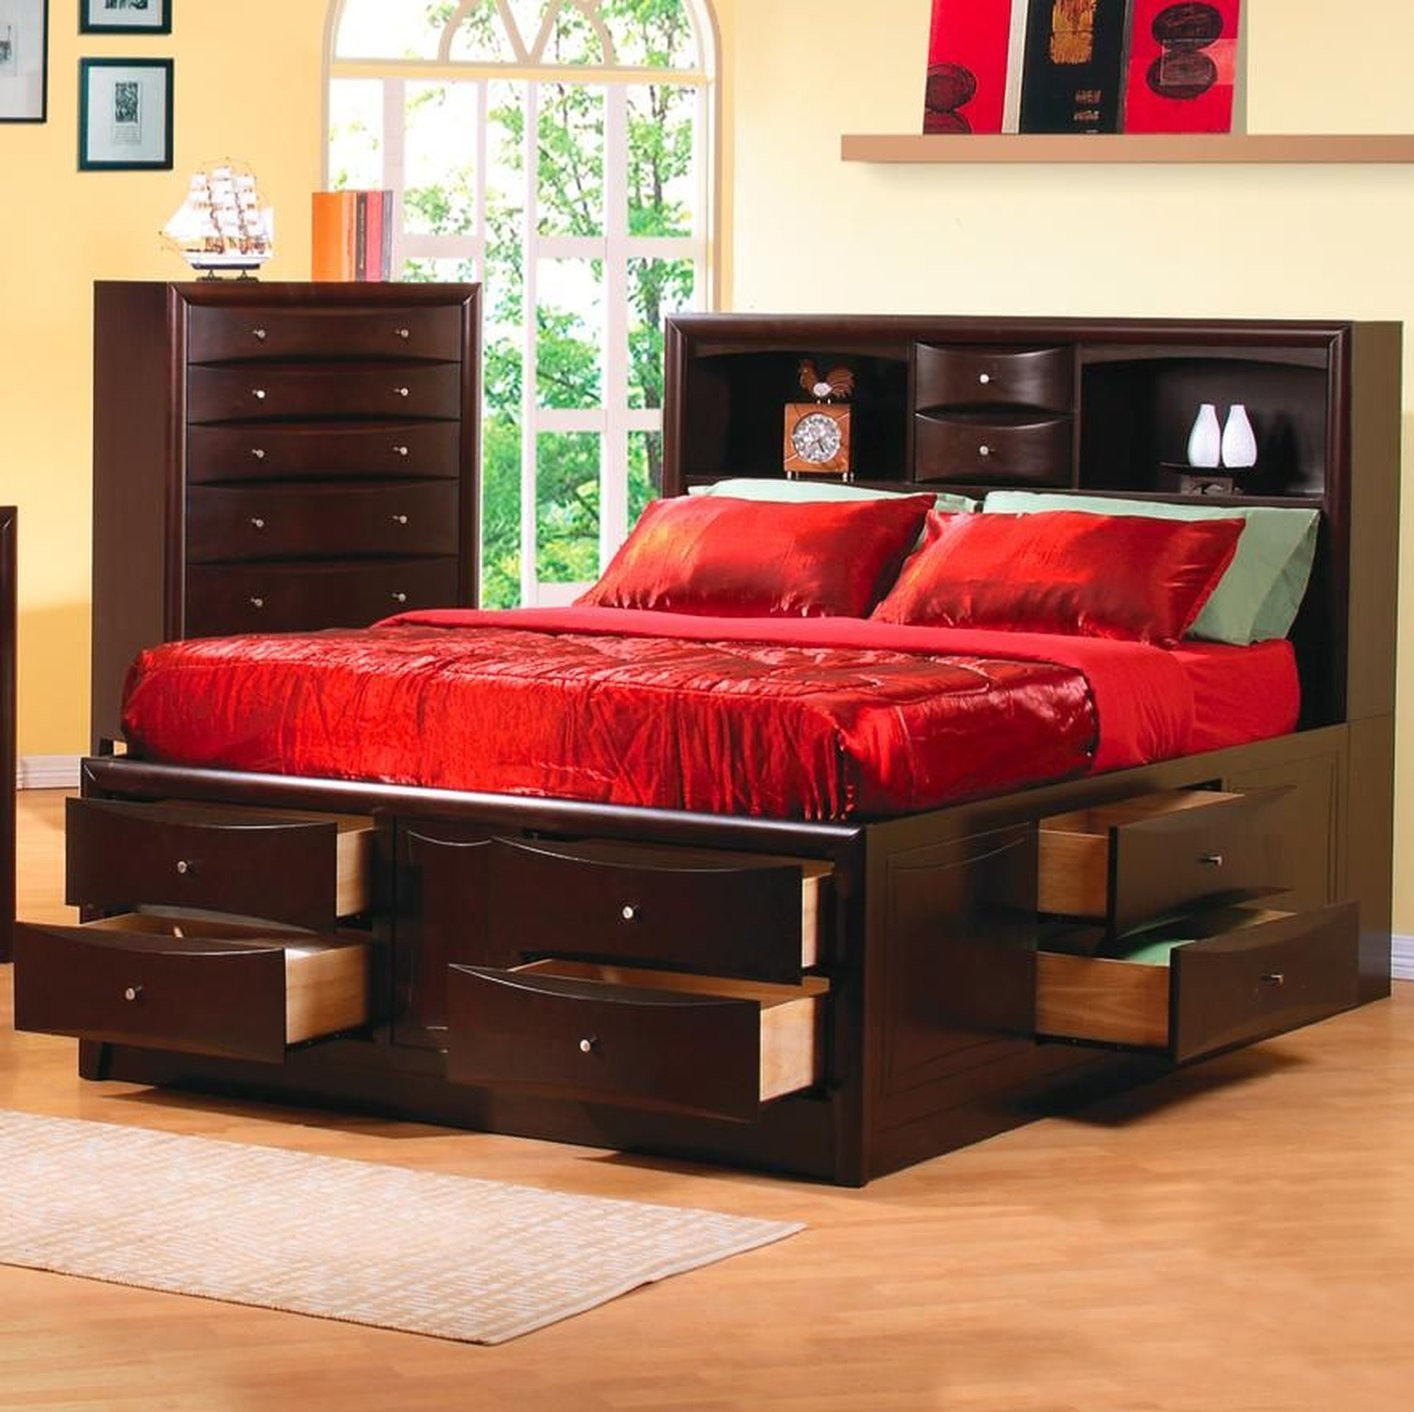 King Size Storage Bedroom Set
 Coaster KW Brown California King Size Wood Bed